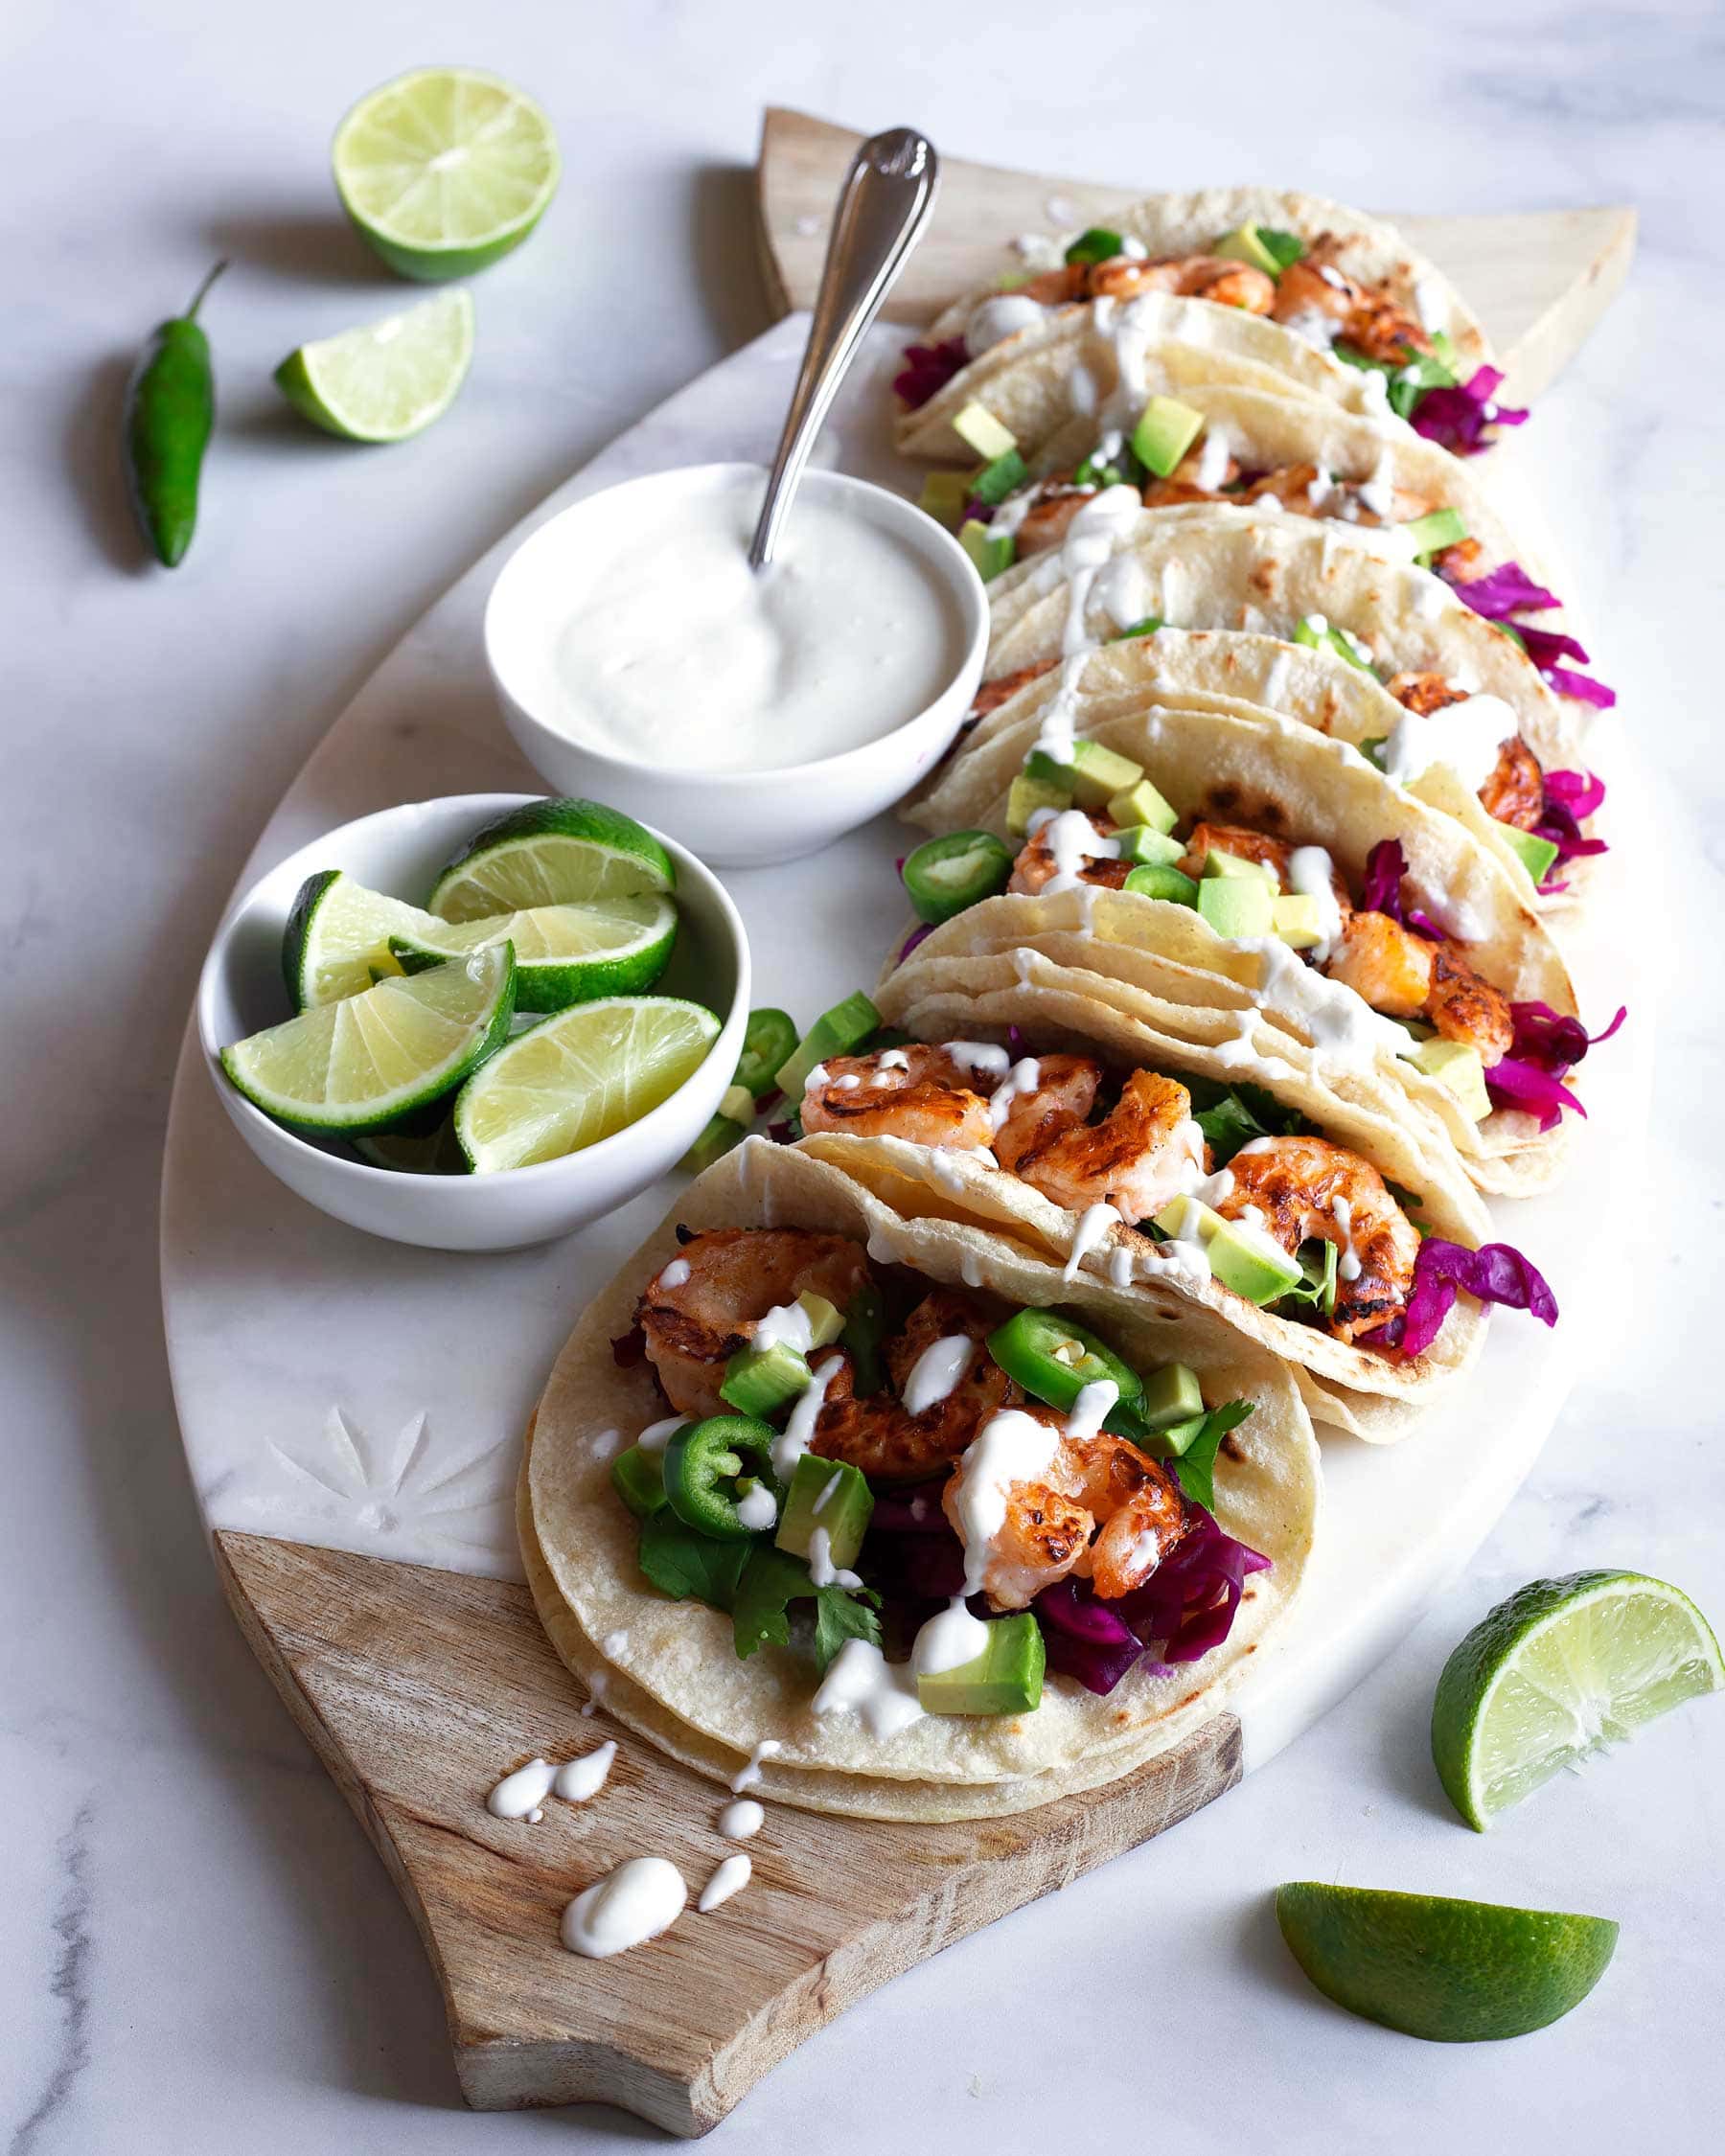 Only 30 minutes to make these easy shrimp tacos! #ad These grilled buffalo shrimp tacos are so flavorful, have the perfect crunch from the simple red cabbage slaw, and are topped with a creamy blue cheese crema! So good and perfect for summer! This recipe is gluten free and can be made low carb and keto by using a keto tortilla! #SauceIntoSummer #SauceLikeYouMeanIt #TexasPete #glutenfree #shrimptacos #shrimprecipes #easydinner #healthydinner #spicyshrimp #glutenfreedinner #weeknightdinner